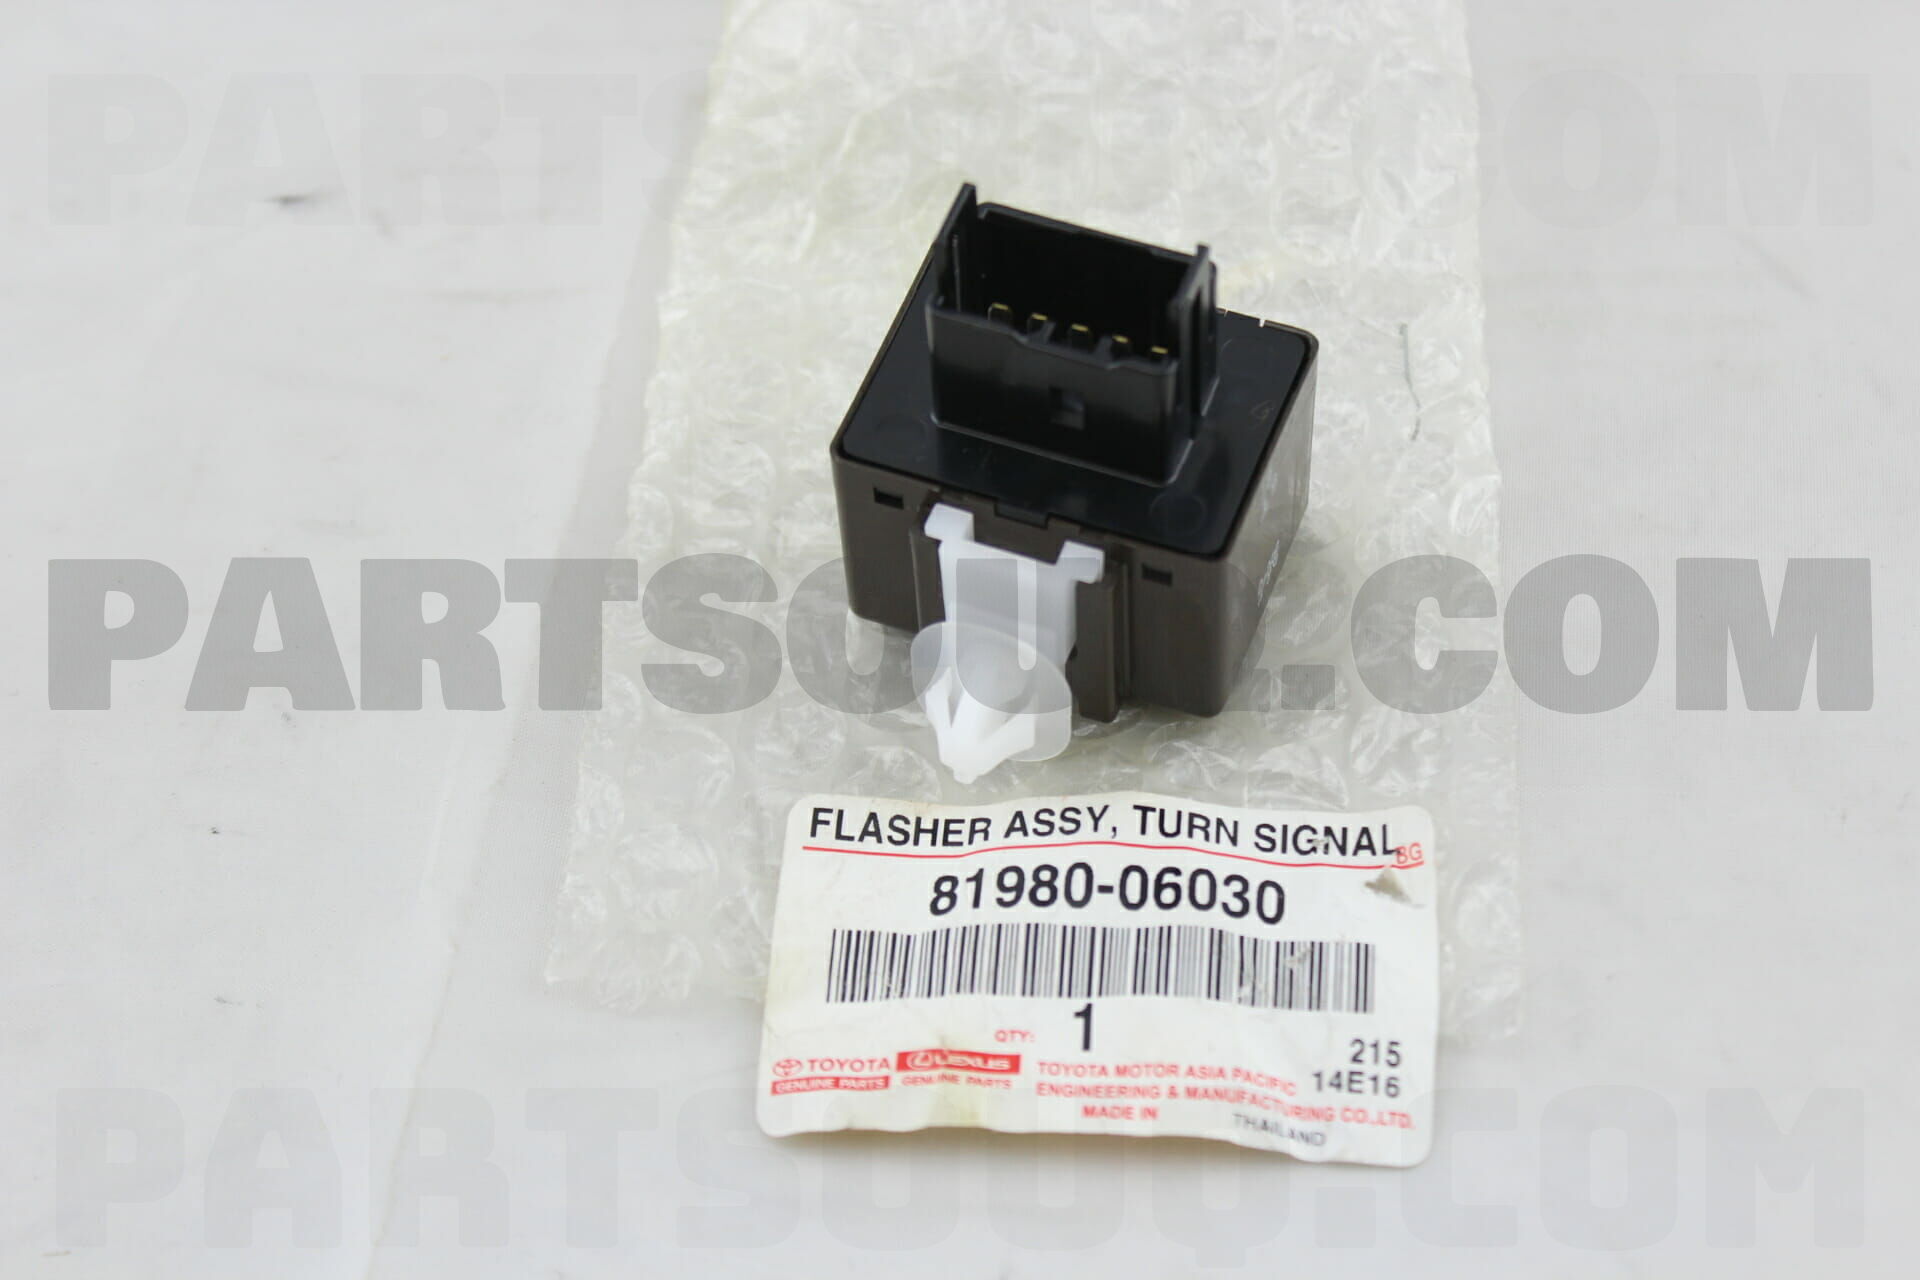 Flasher Assy, Turn Signal 8198006030 | Toyota Parts | Partsouq